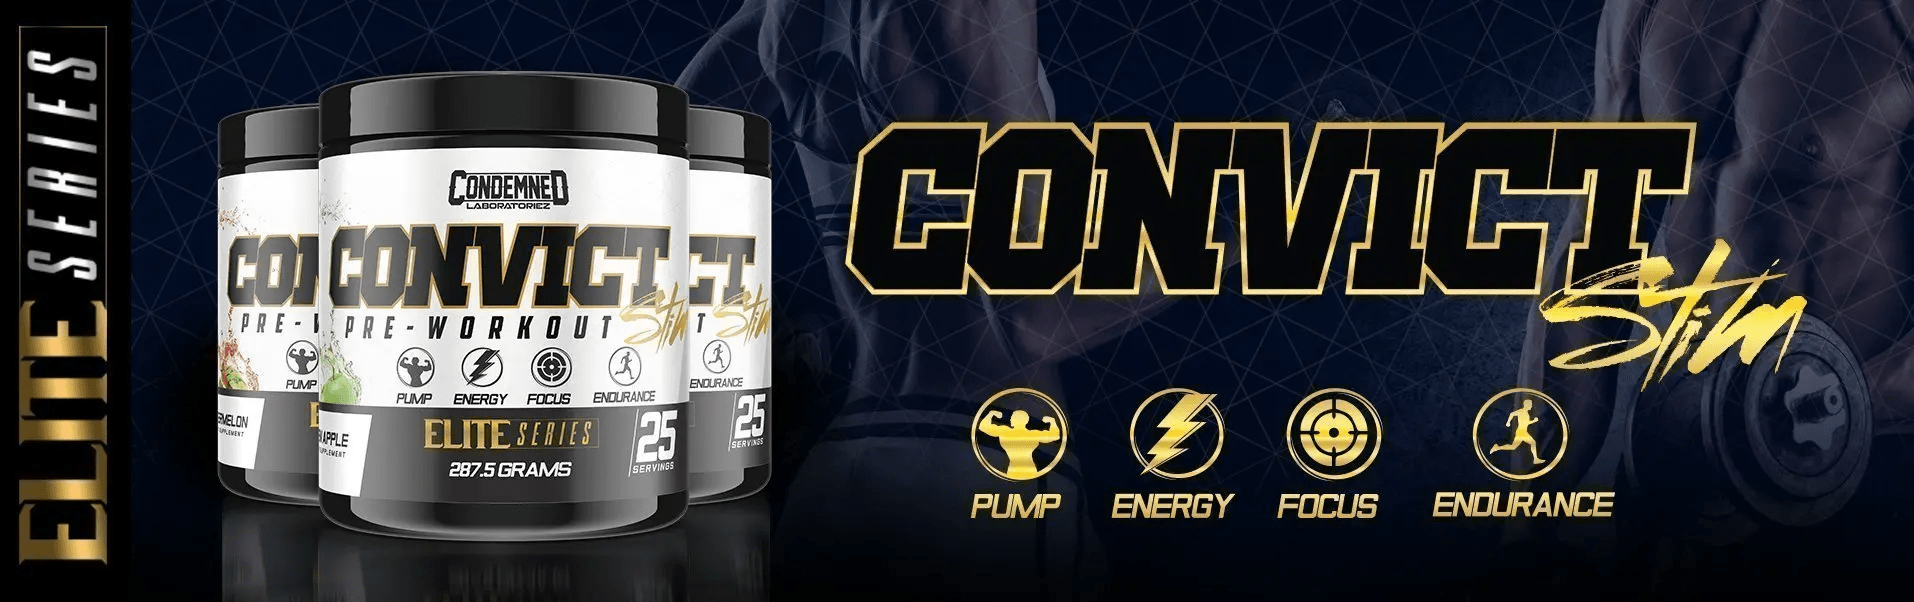 Condemned Labz  Convict Stim 400g / 25 servings,  ml, Condemned Labz. Pre Workout